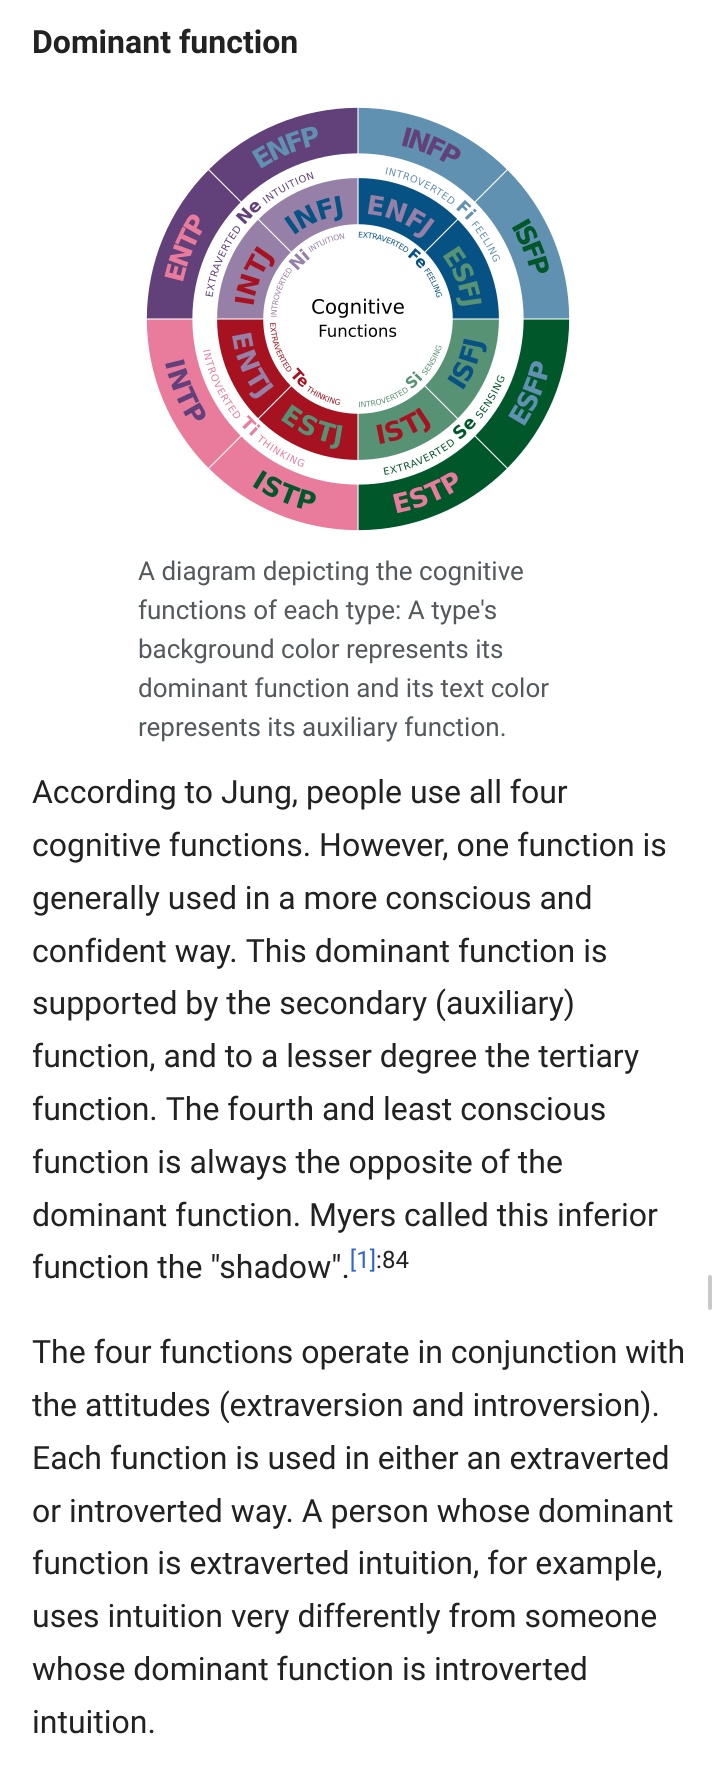 Rongzz The Four Cognitive Functions Cr Esfj Fe Si Ne Ti Bm Isfp Fi Se Ni Te Ej Intp Ti Ne Si Fe Ne Intj Ni Te Fi Se Nj Esfj Fe Si Ne Ti Hy Infp Fi Ne Si Te F Feeling N Intuition T